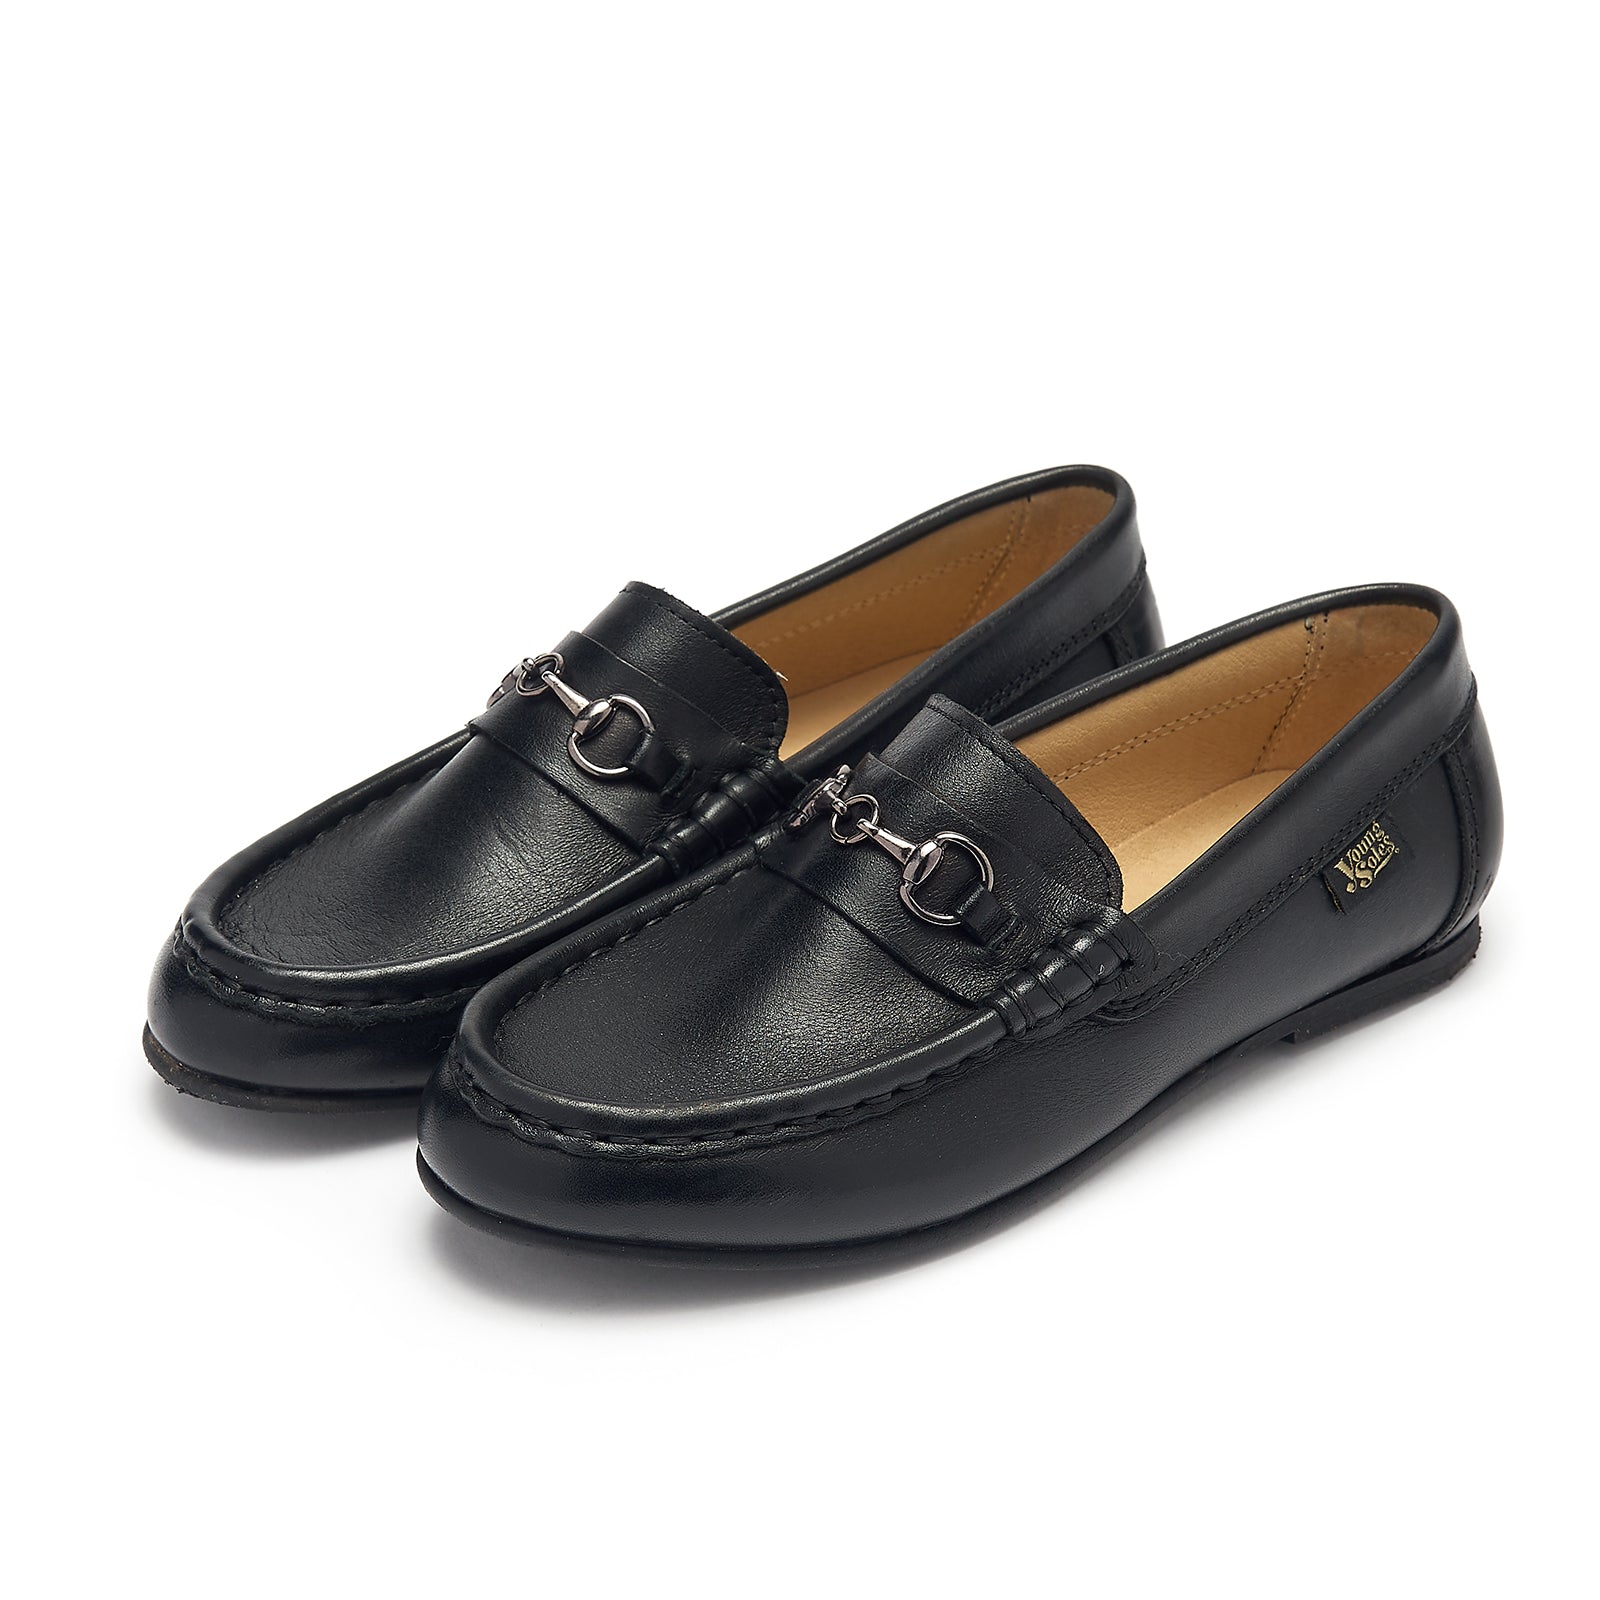 Young Soles Ricki Black Loafer Leather Shoes